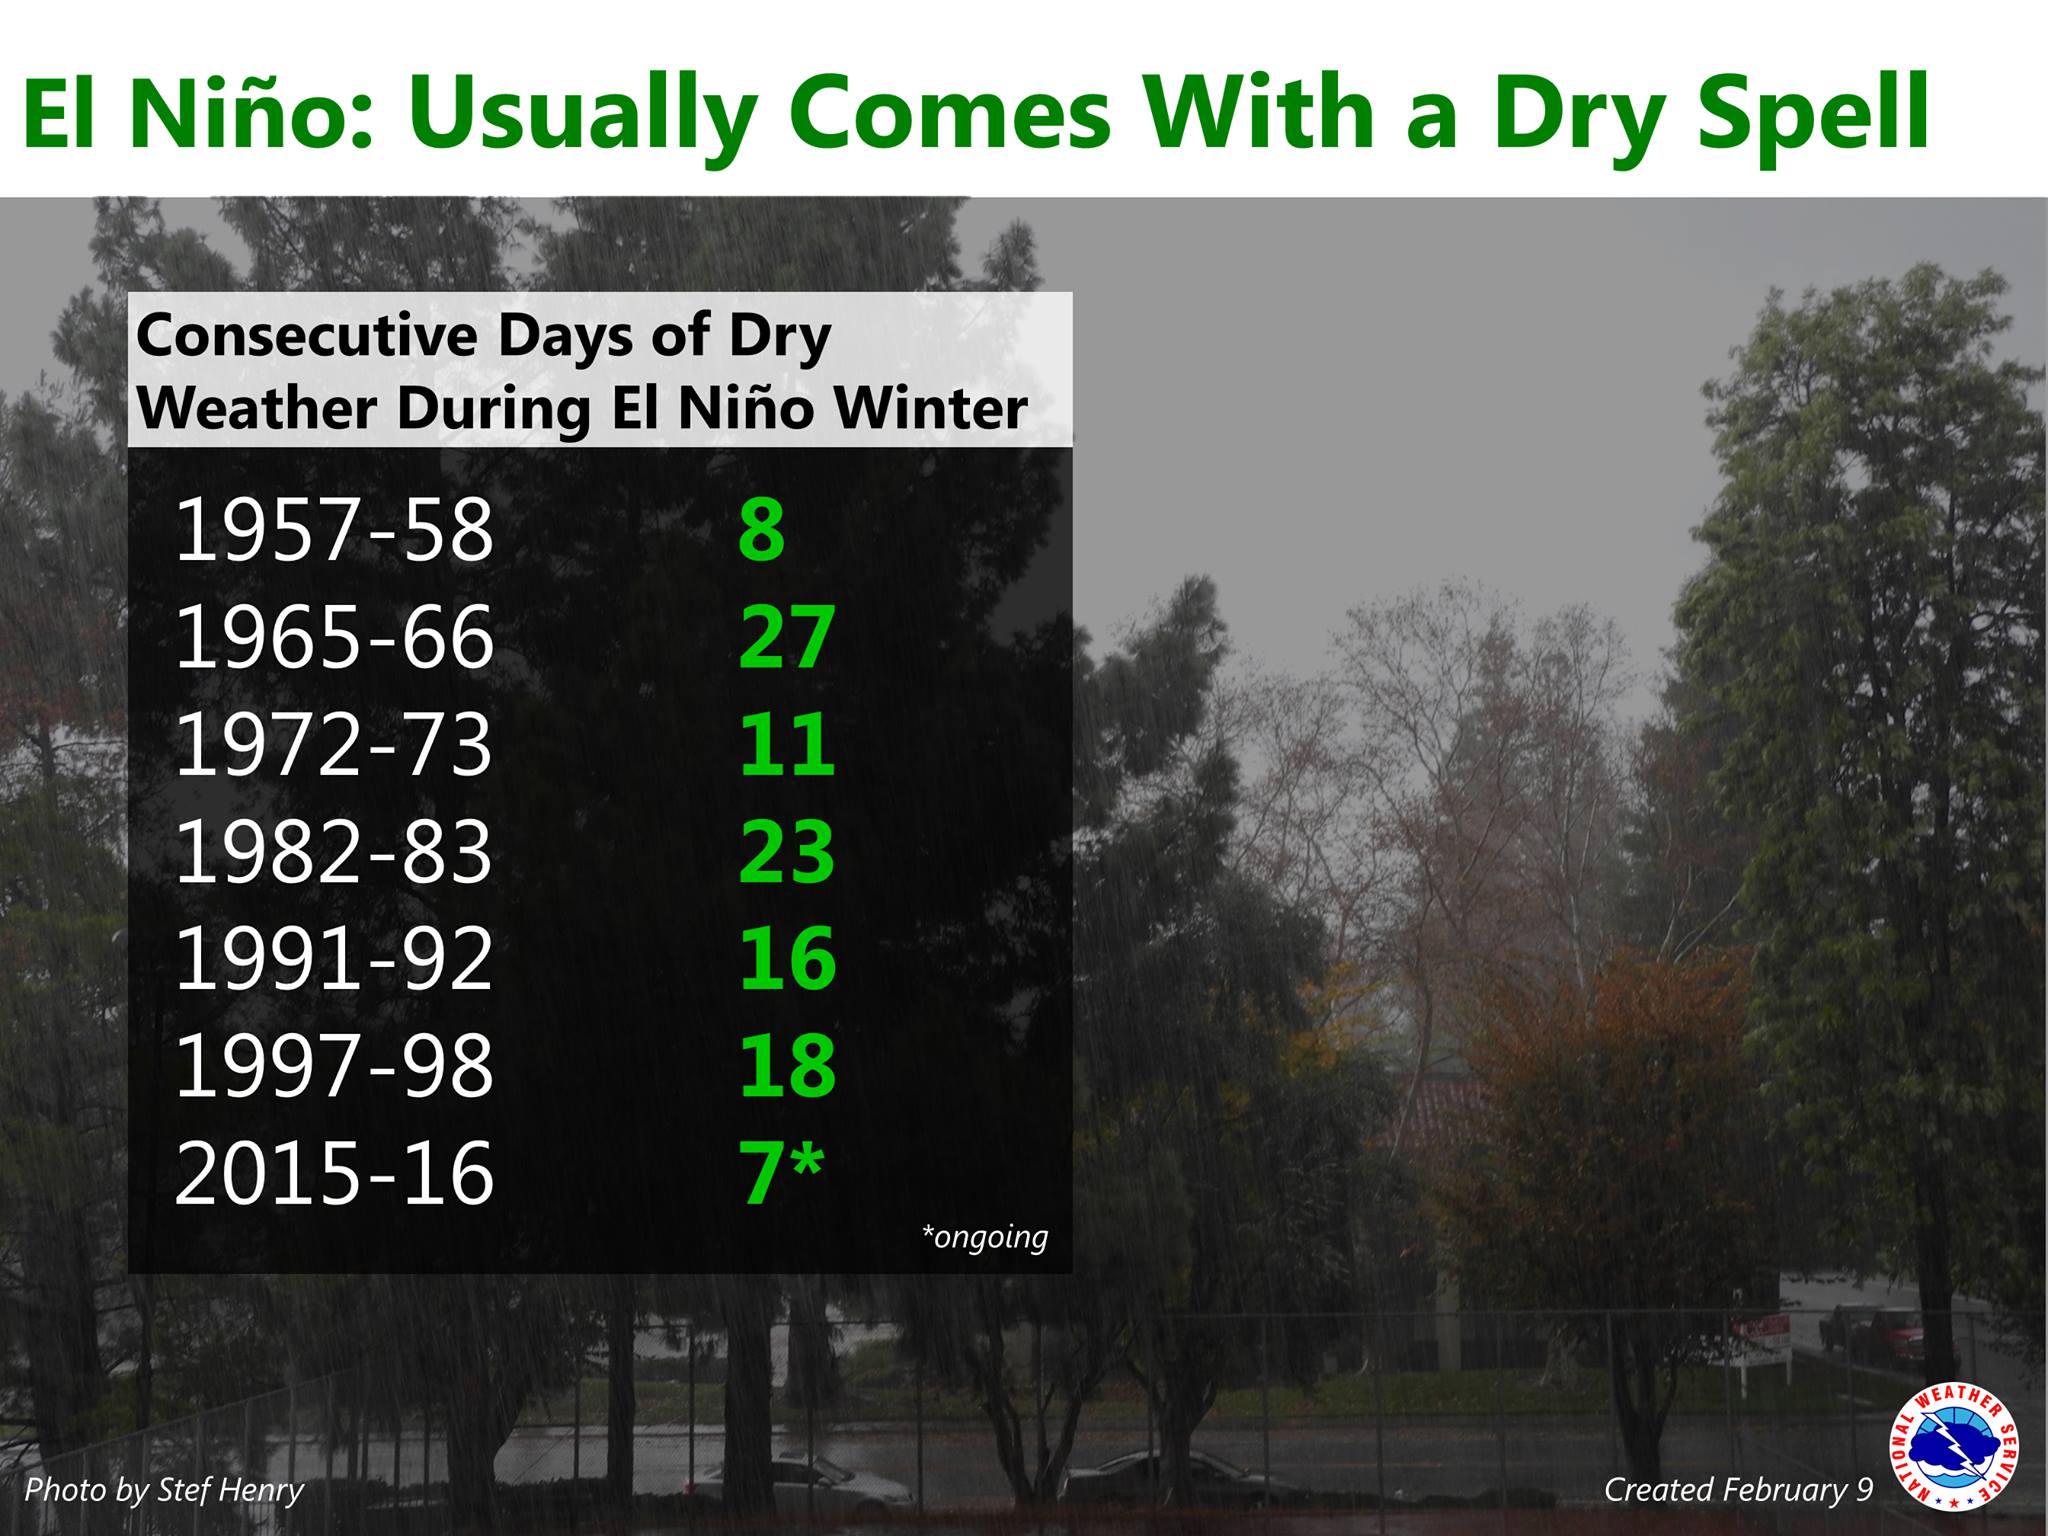 "A frequent question we've been hearing lately: "Is it unusual to go through a dry spell during an El Niño winter?" As it turns out, it's not unusual at all! Most of the prior strong El Niño winters have had substantial dry stretches. These values were taken at Sacramento." - NOAA, today